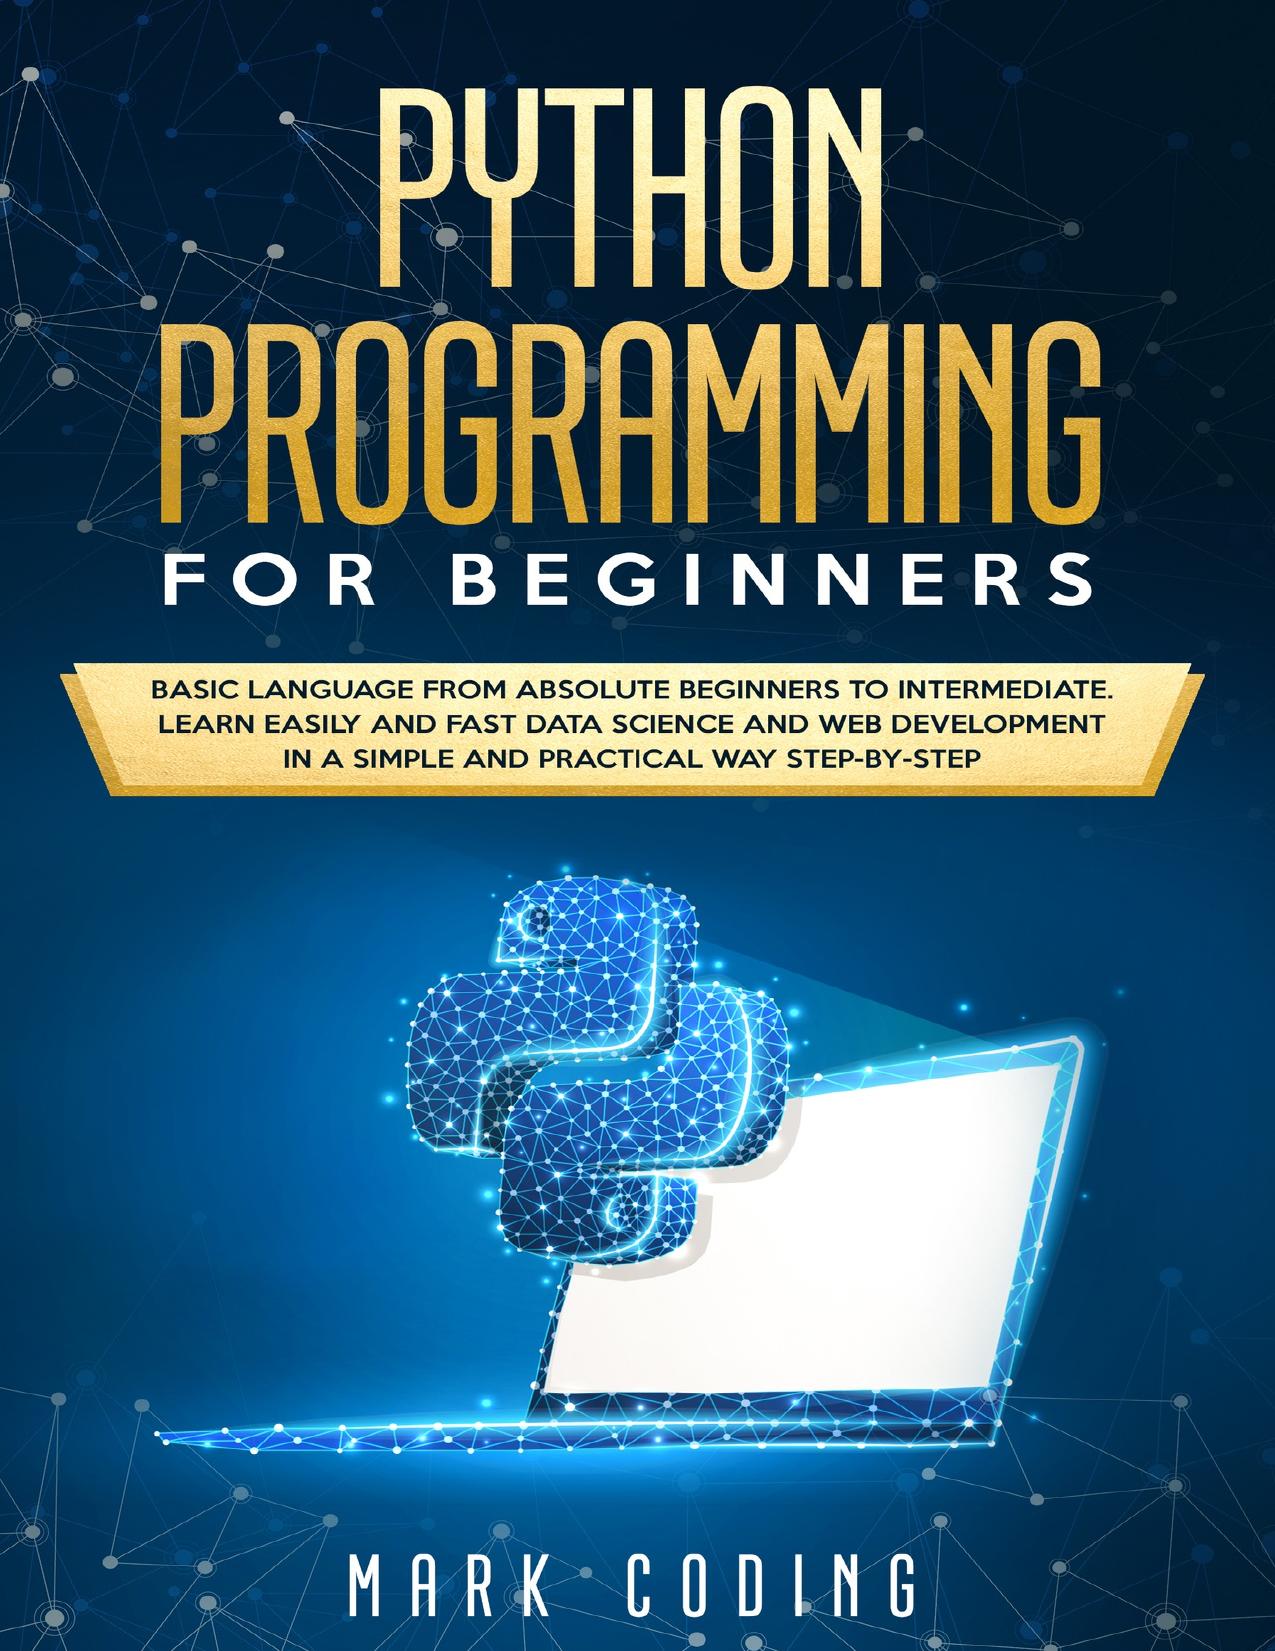 Python Programming for Beginners: Basic Language from Absolute Beginners to Intermediate. Learn Easily and Fast Data Science and Web Development in a Simple and Practical Way Step-by-Step by MARK CODING